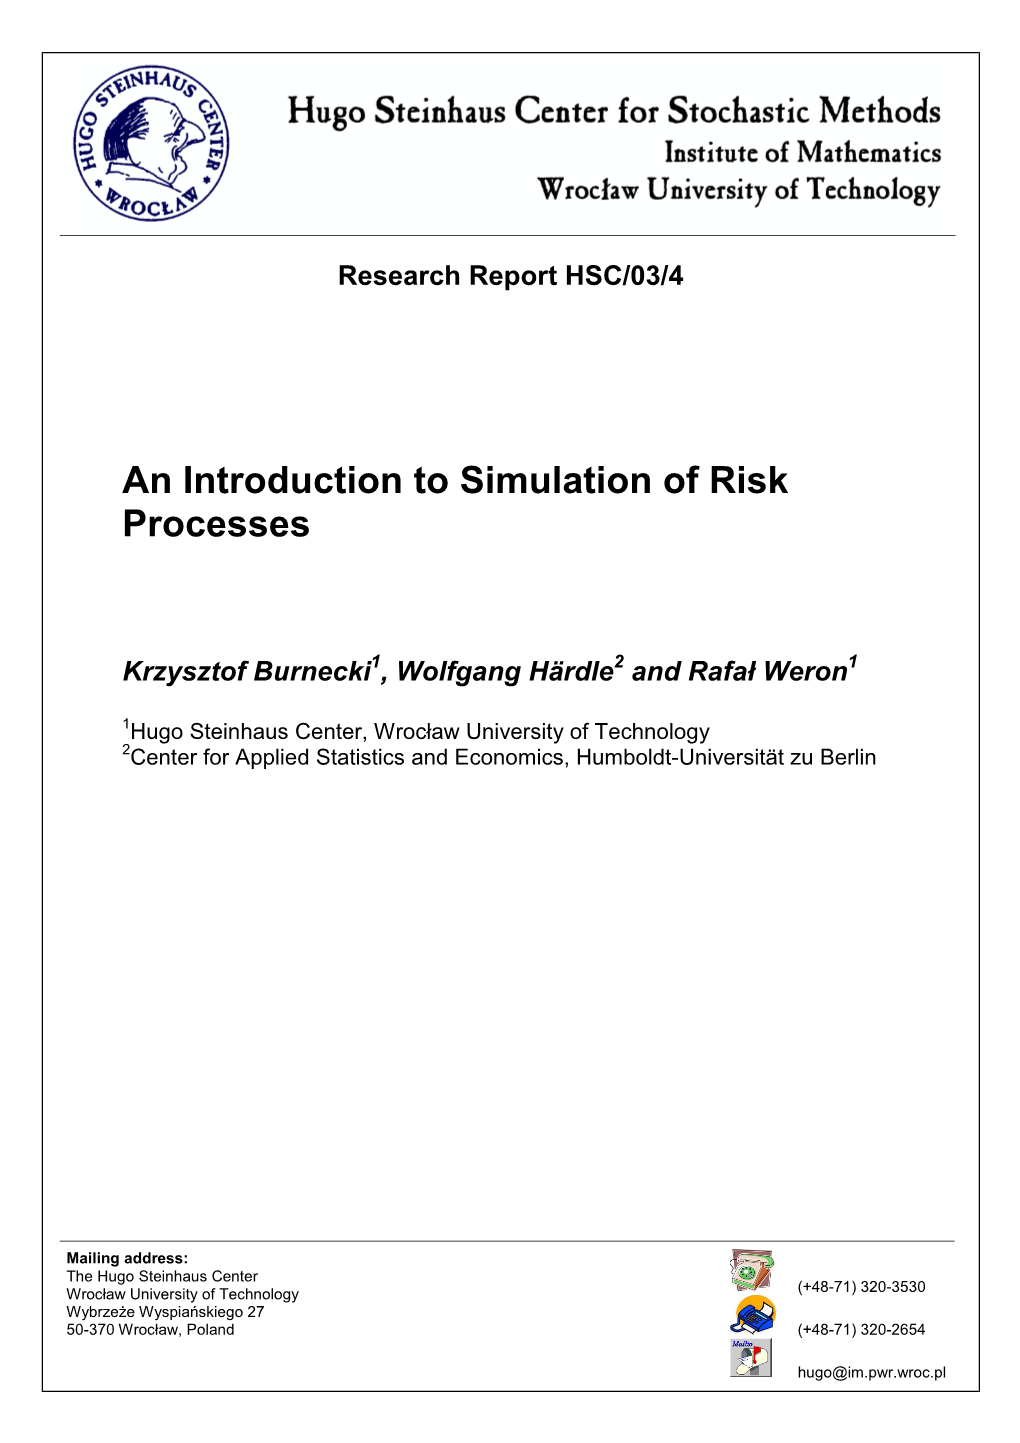 An Introduction to Simulation of Risk Processes